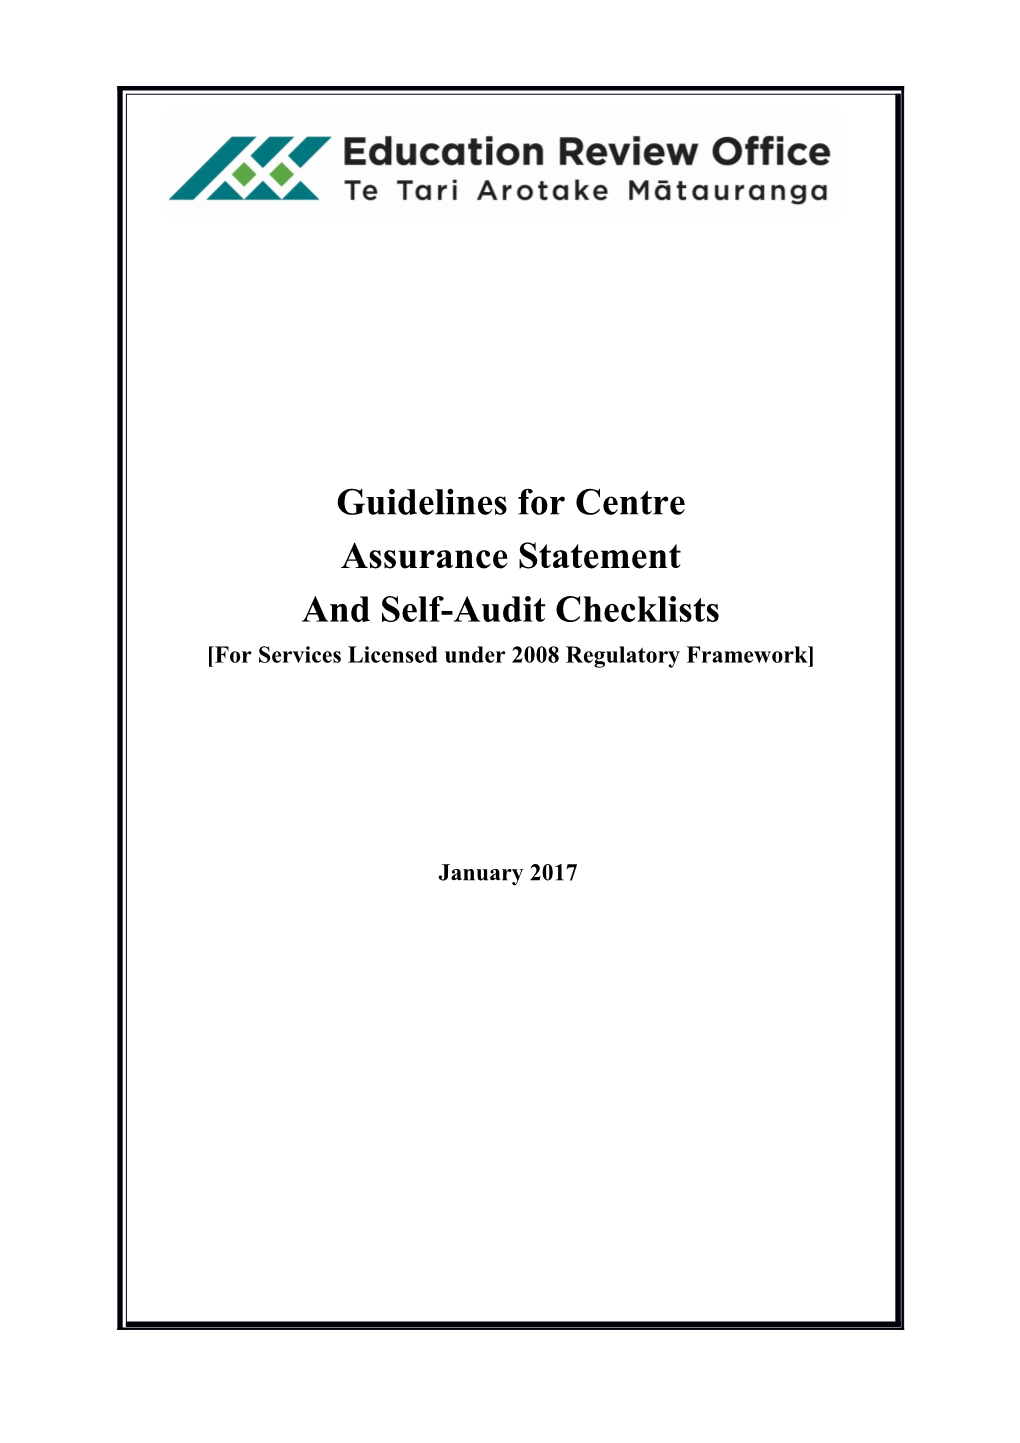 Guidelines for Centre Management